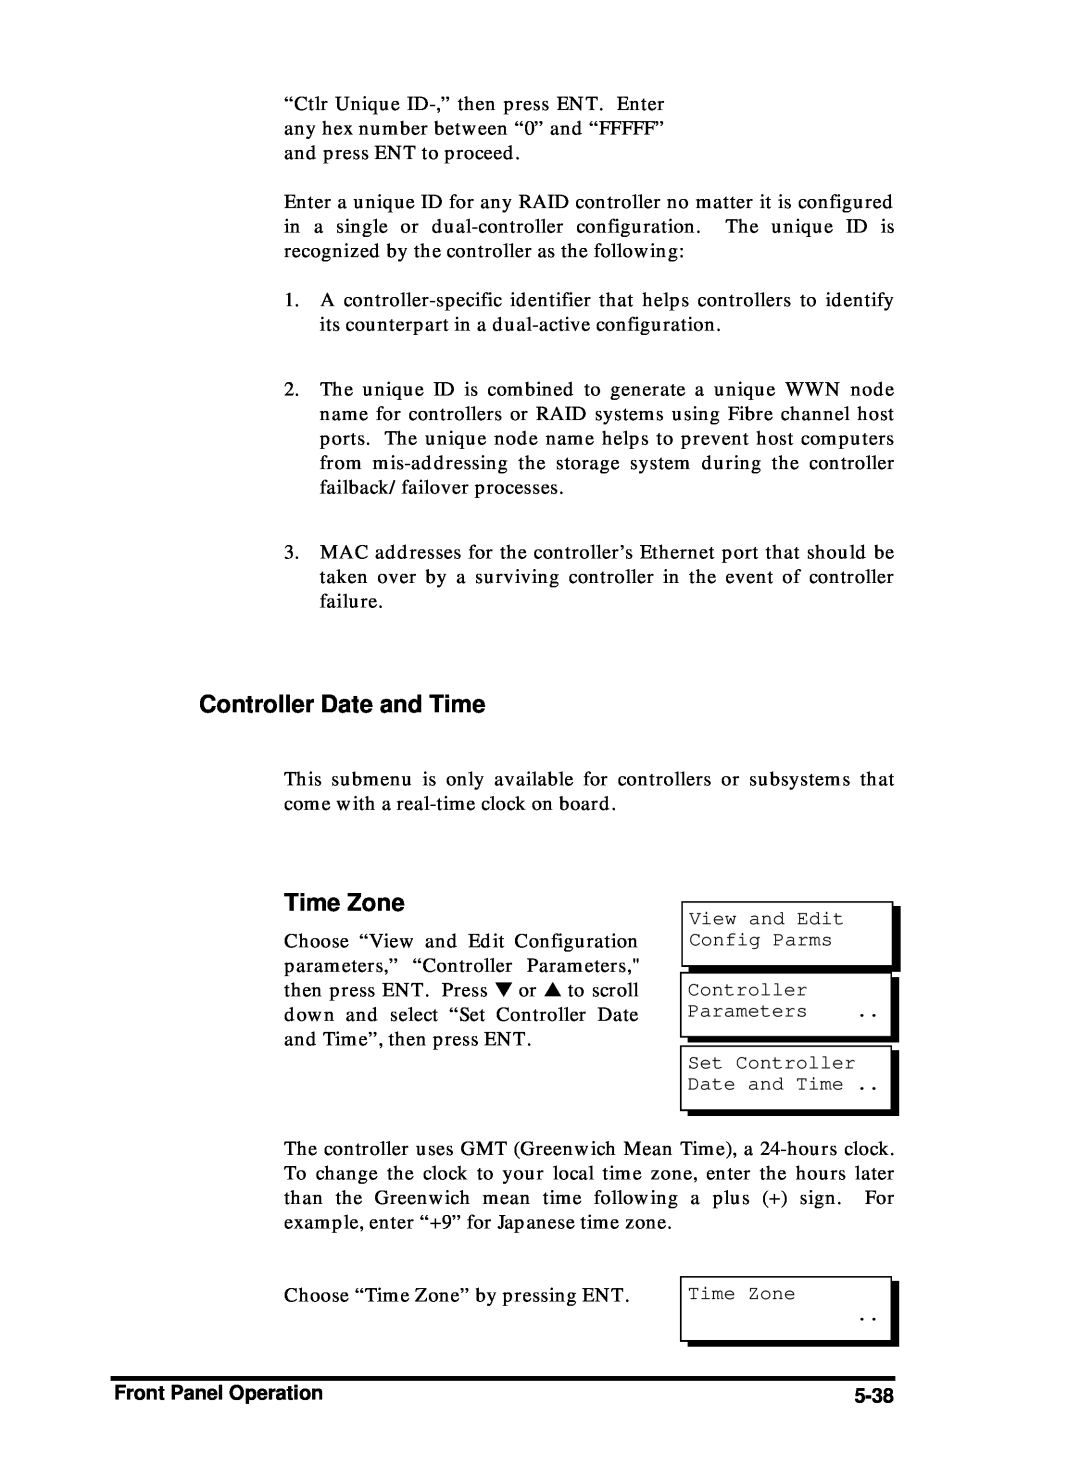 Compaq Infortrend manual Controller Date and Time, Time Zone 